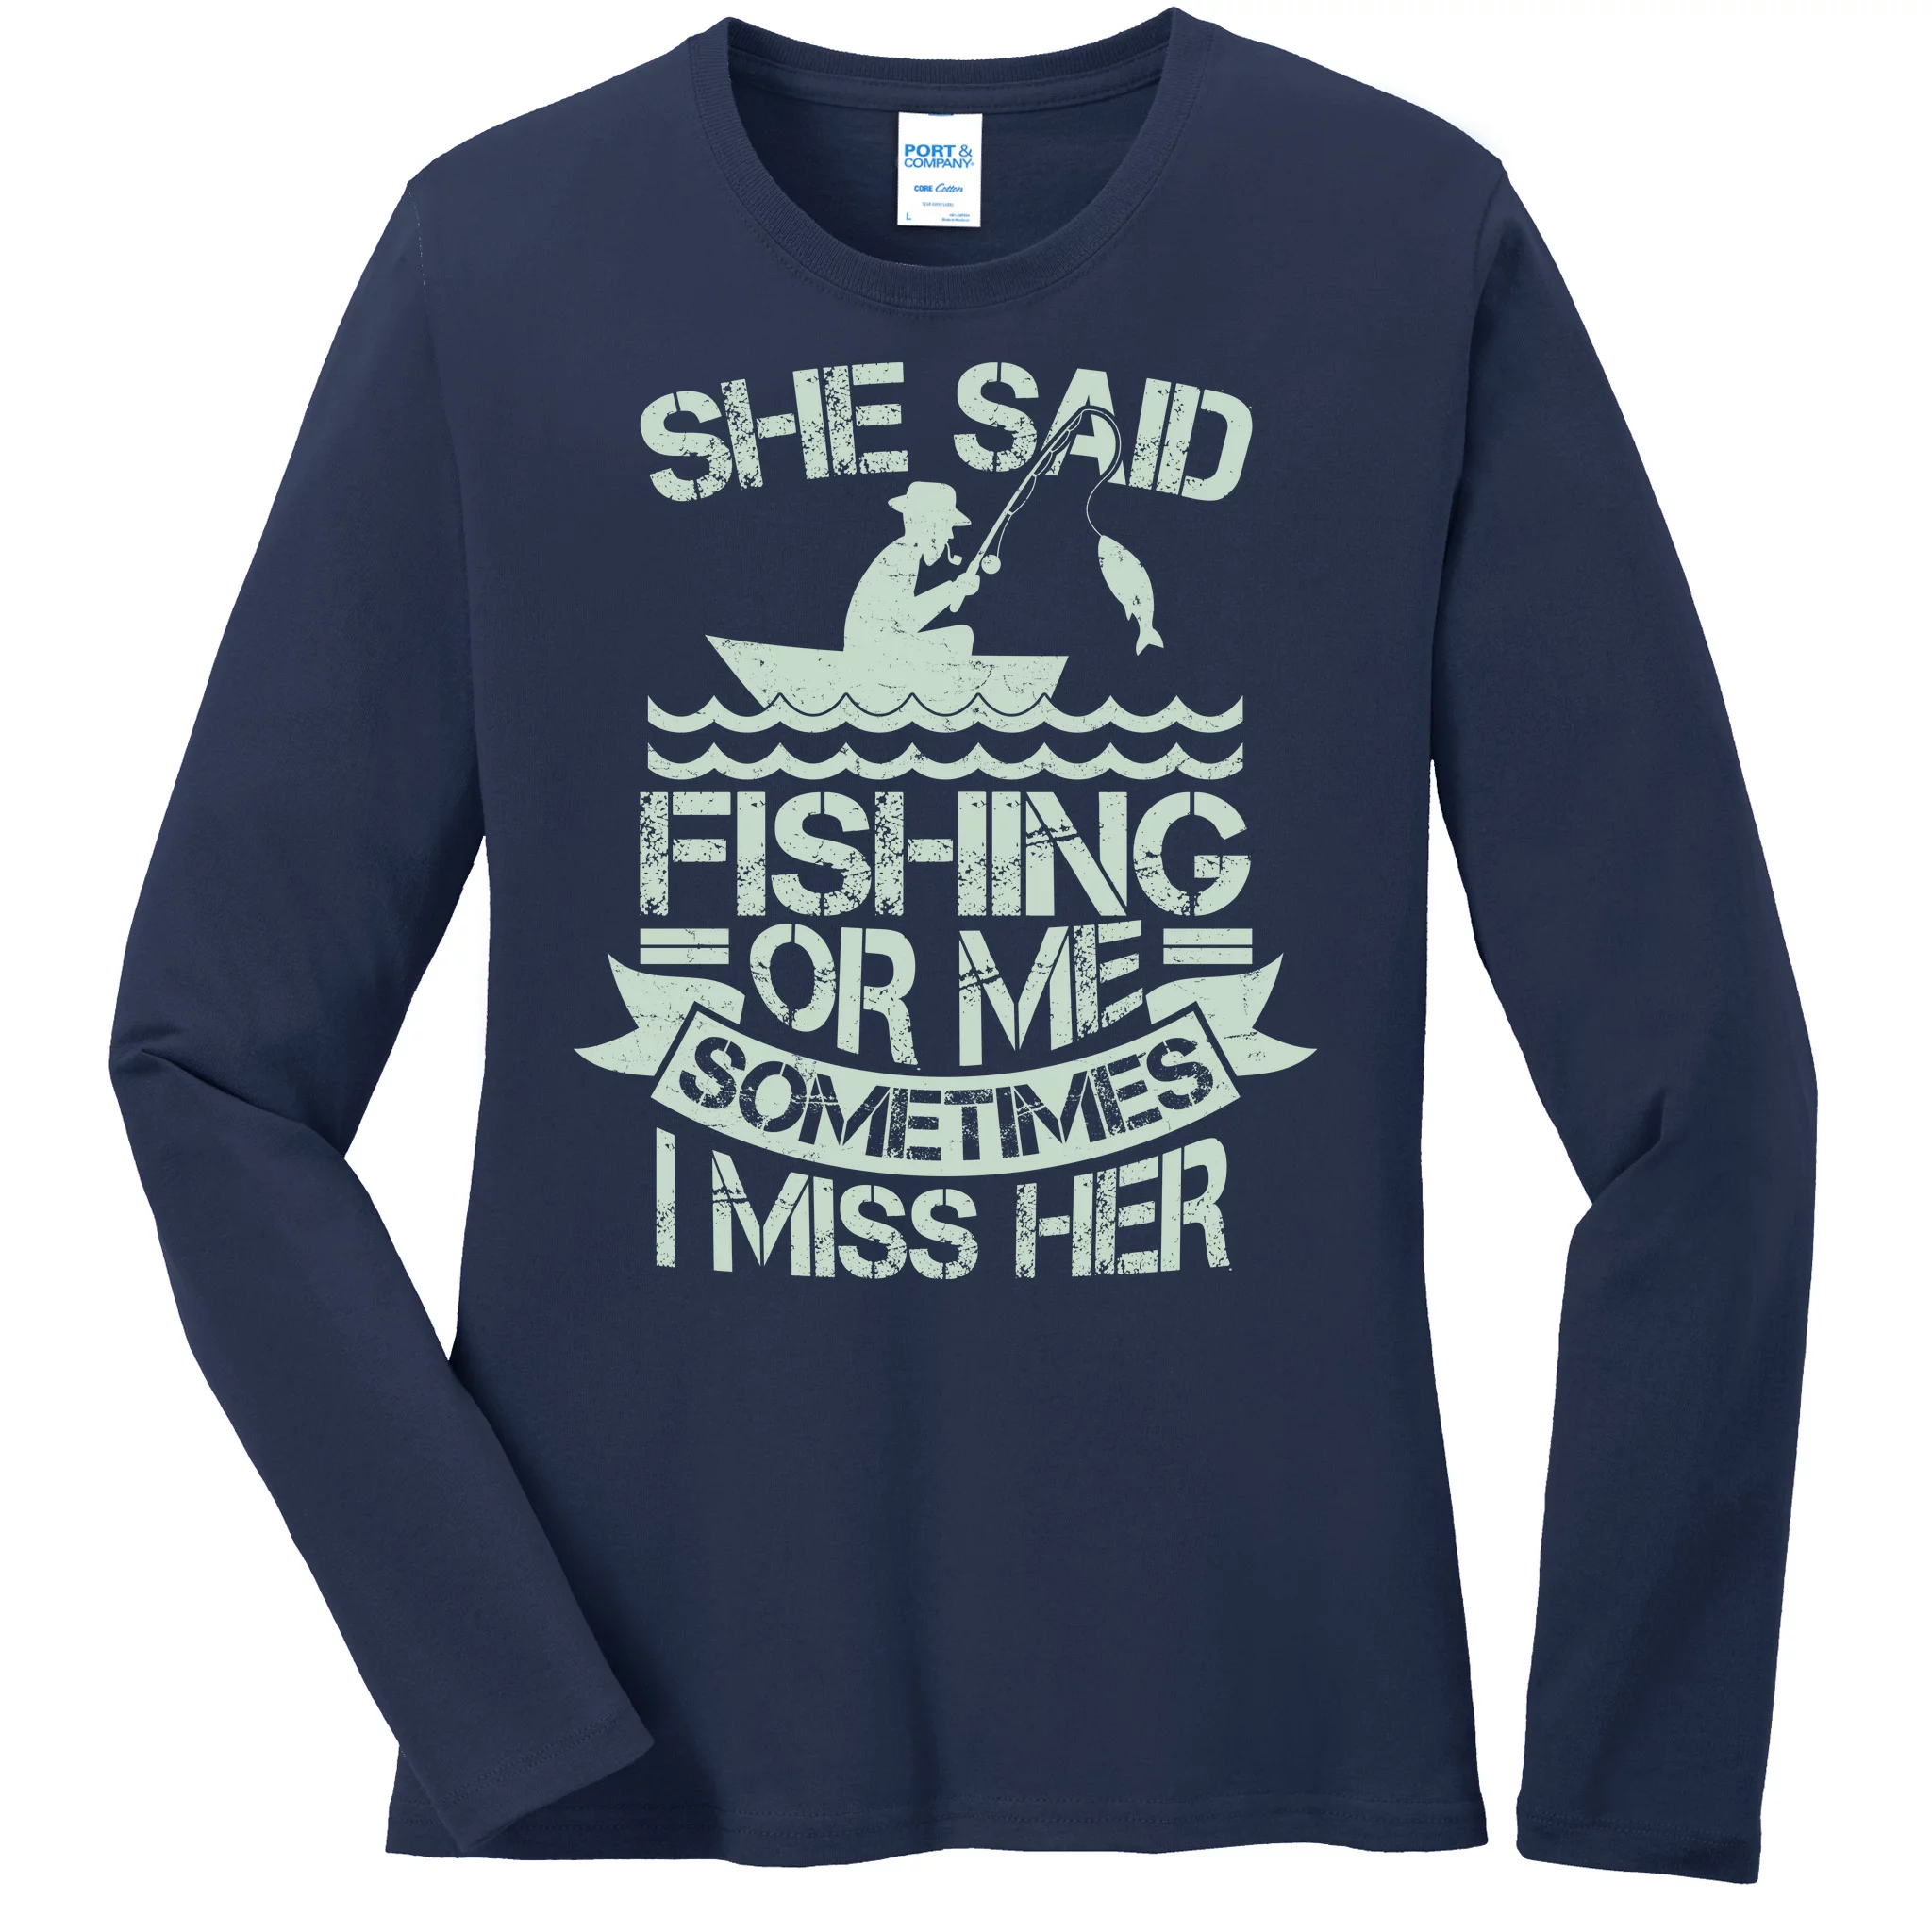 This The Cute Fish Ladies Missy Fit Long Sleeve Shirt